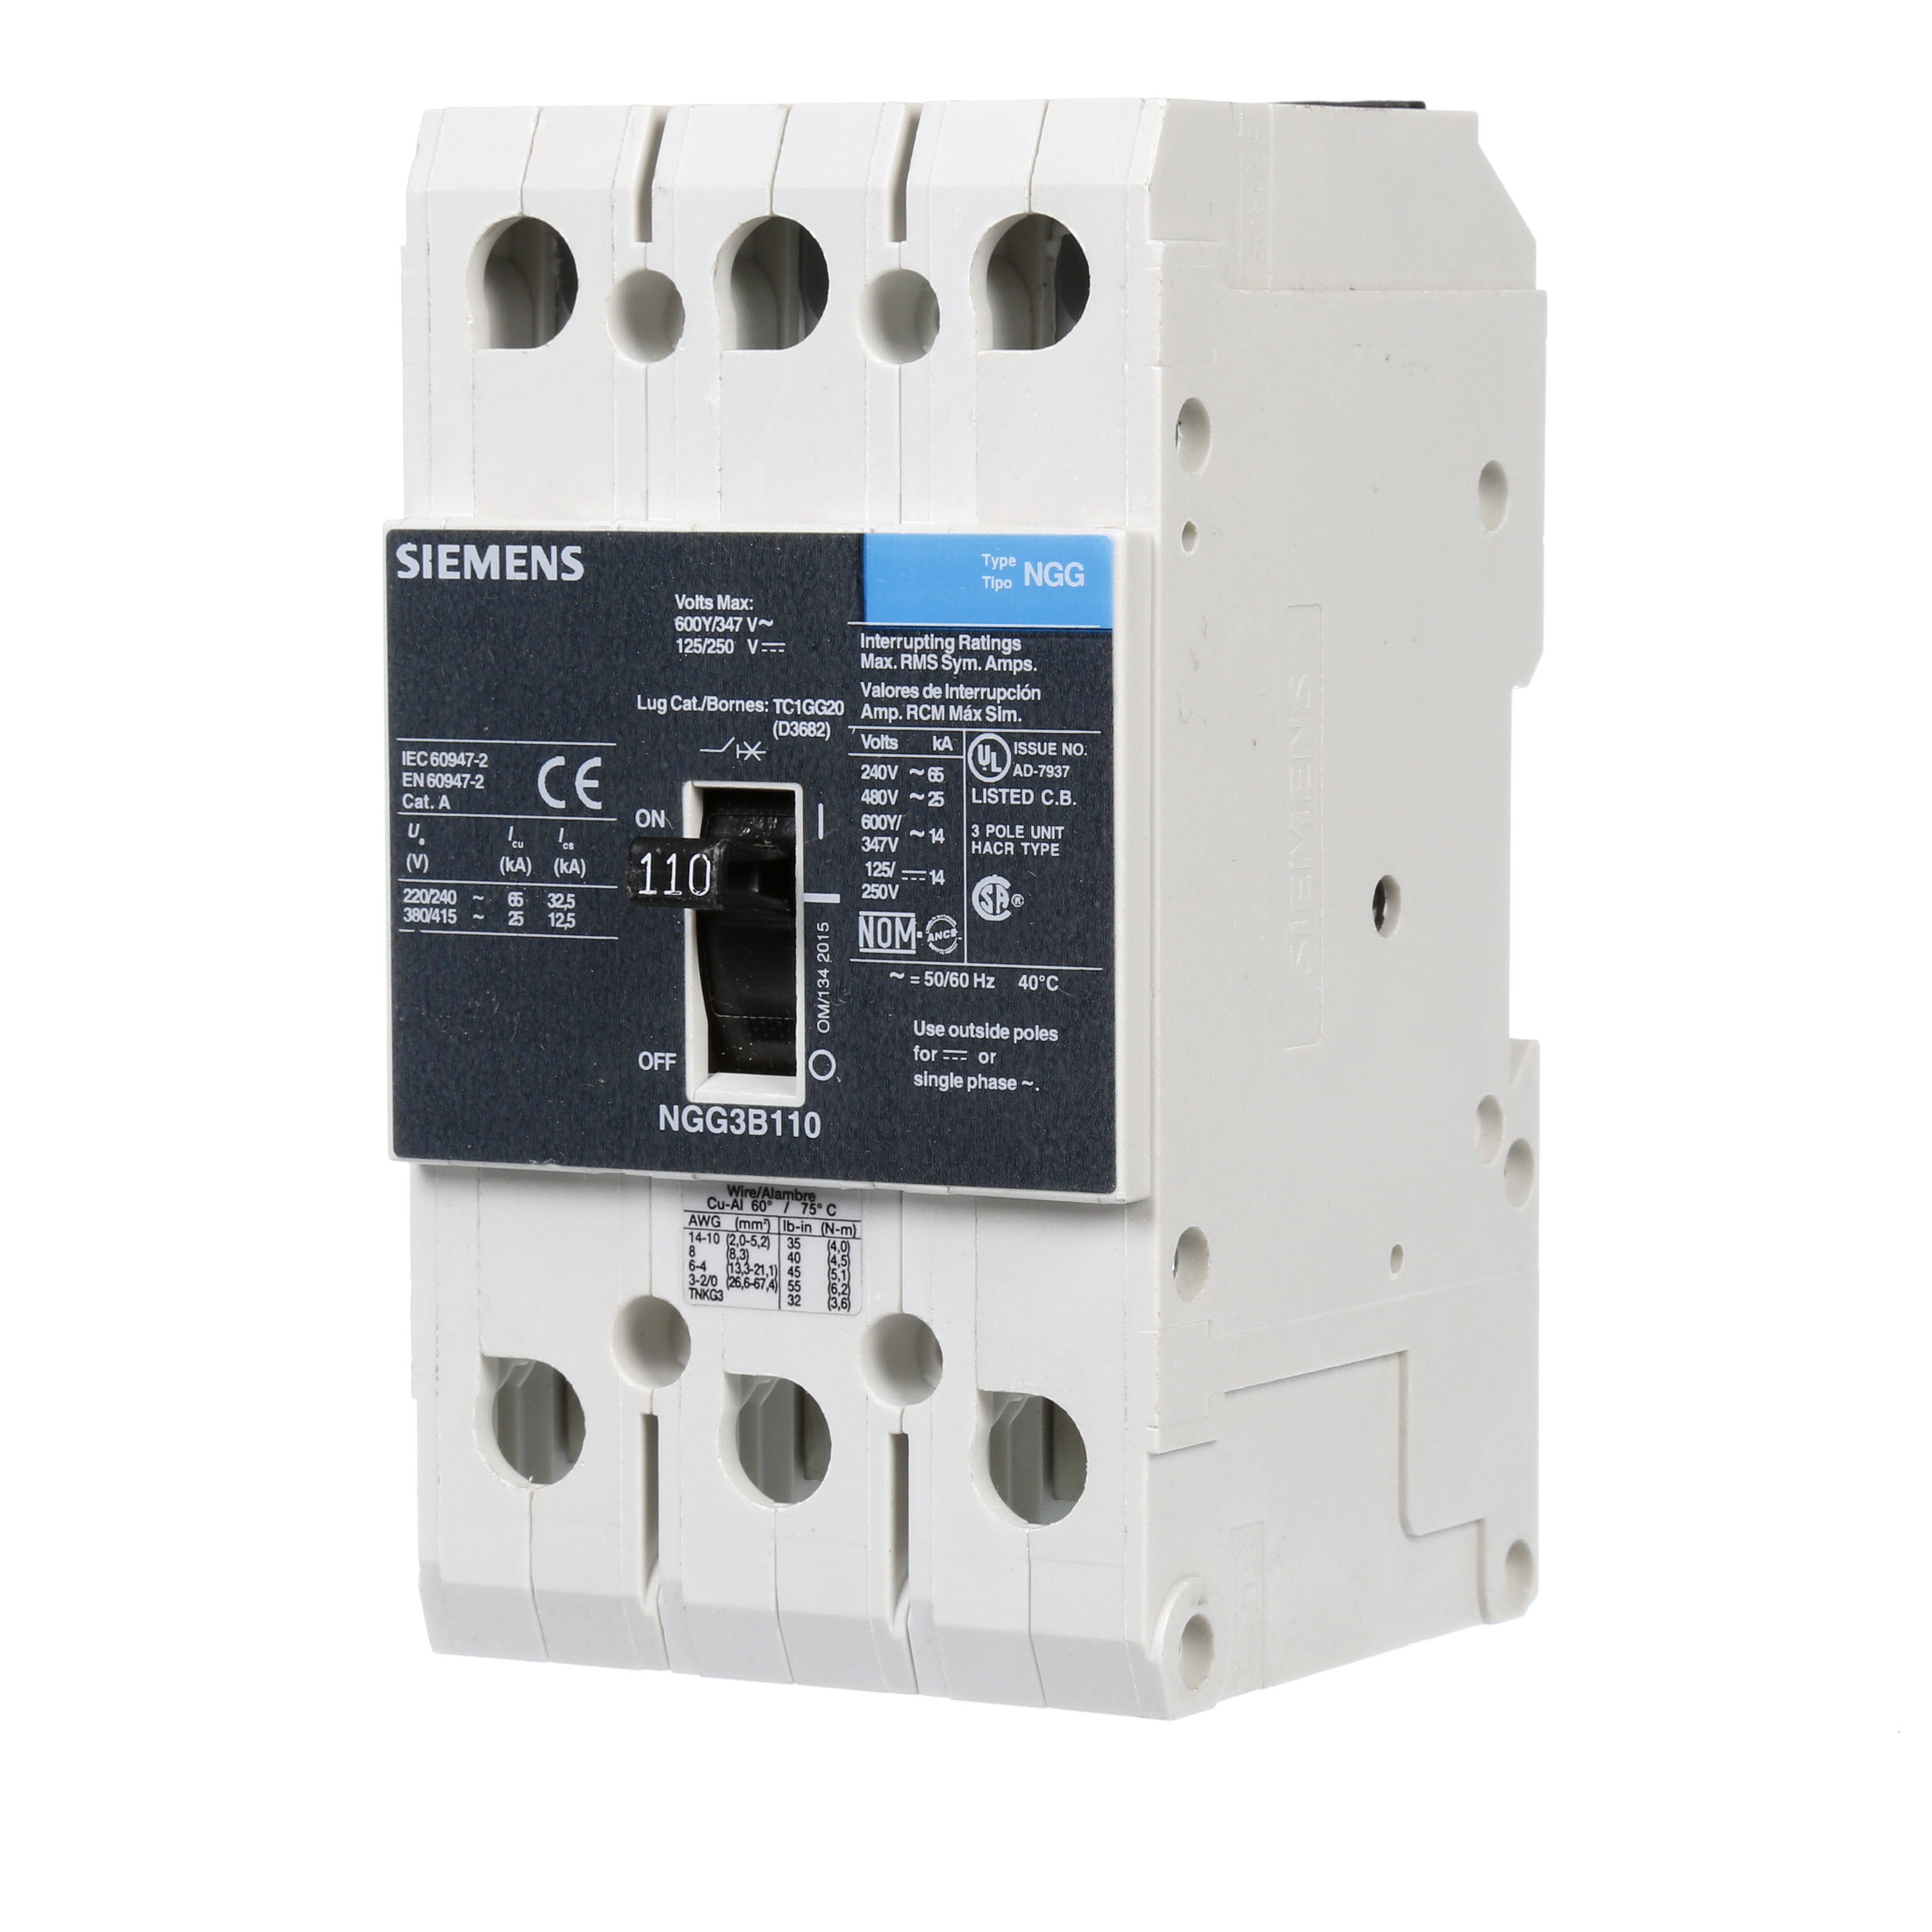 SIEMENS LOW VOLTAGE G FRAME CIRCUIT BREAKER WITH THERMAL - MAGNETIC TRIP. UL LISTED NGG FRAME WITH STANDARD BREAKING CAPACITY. 110A 3-POLE (14KAIC AT 600Y/347V) (25KAIC AT 480V). SPECIAL FEATURES MOUNTS ON DIN RAIL / SCREW, LINE AND LOAD SIDE LUGS (TC1GG20) WIRE RANGE 8 - 1/0 AWS (CU/AL). DIMENSIONS (W x H x D) IN 3 x5.4 x 2.8.